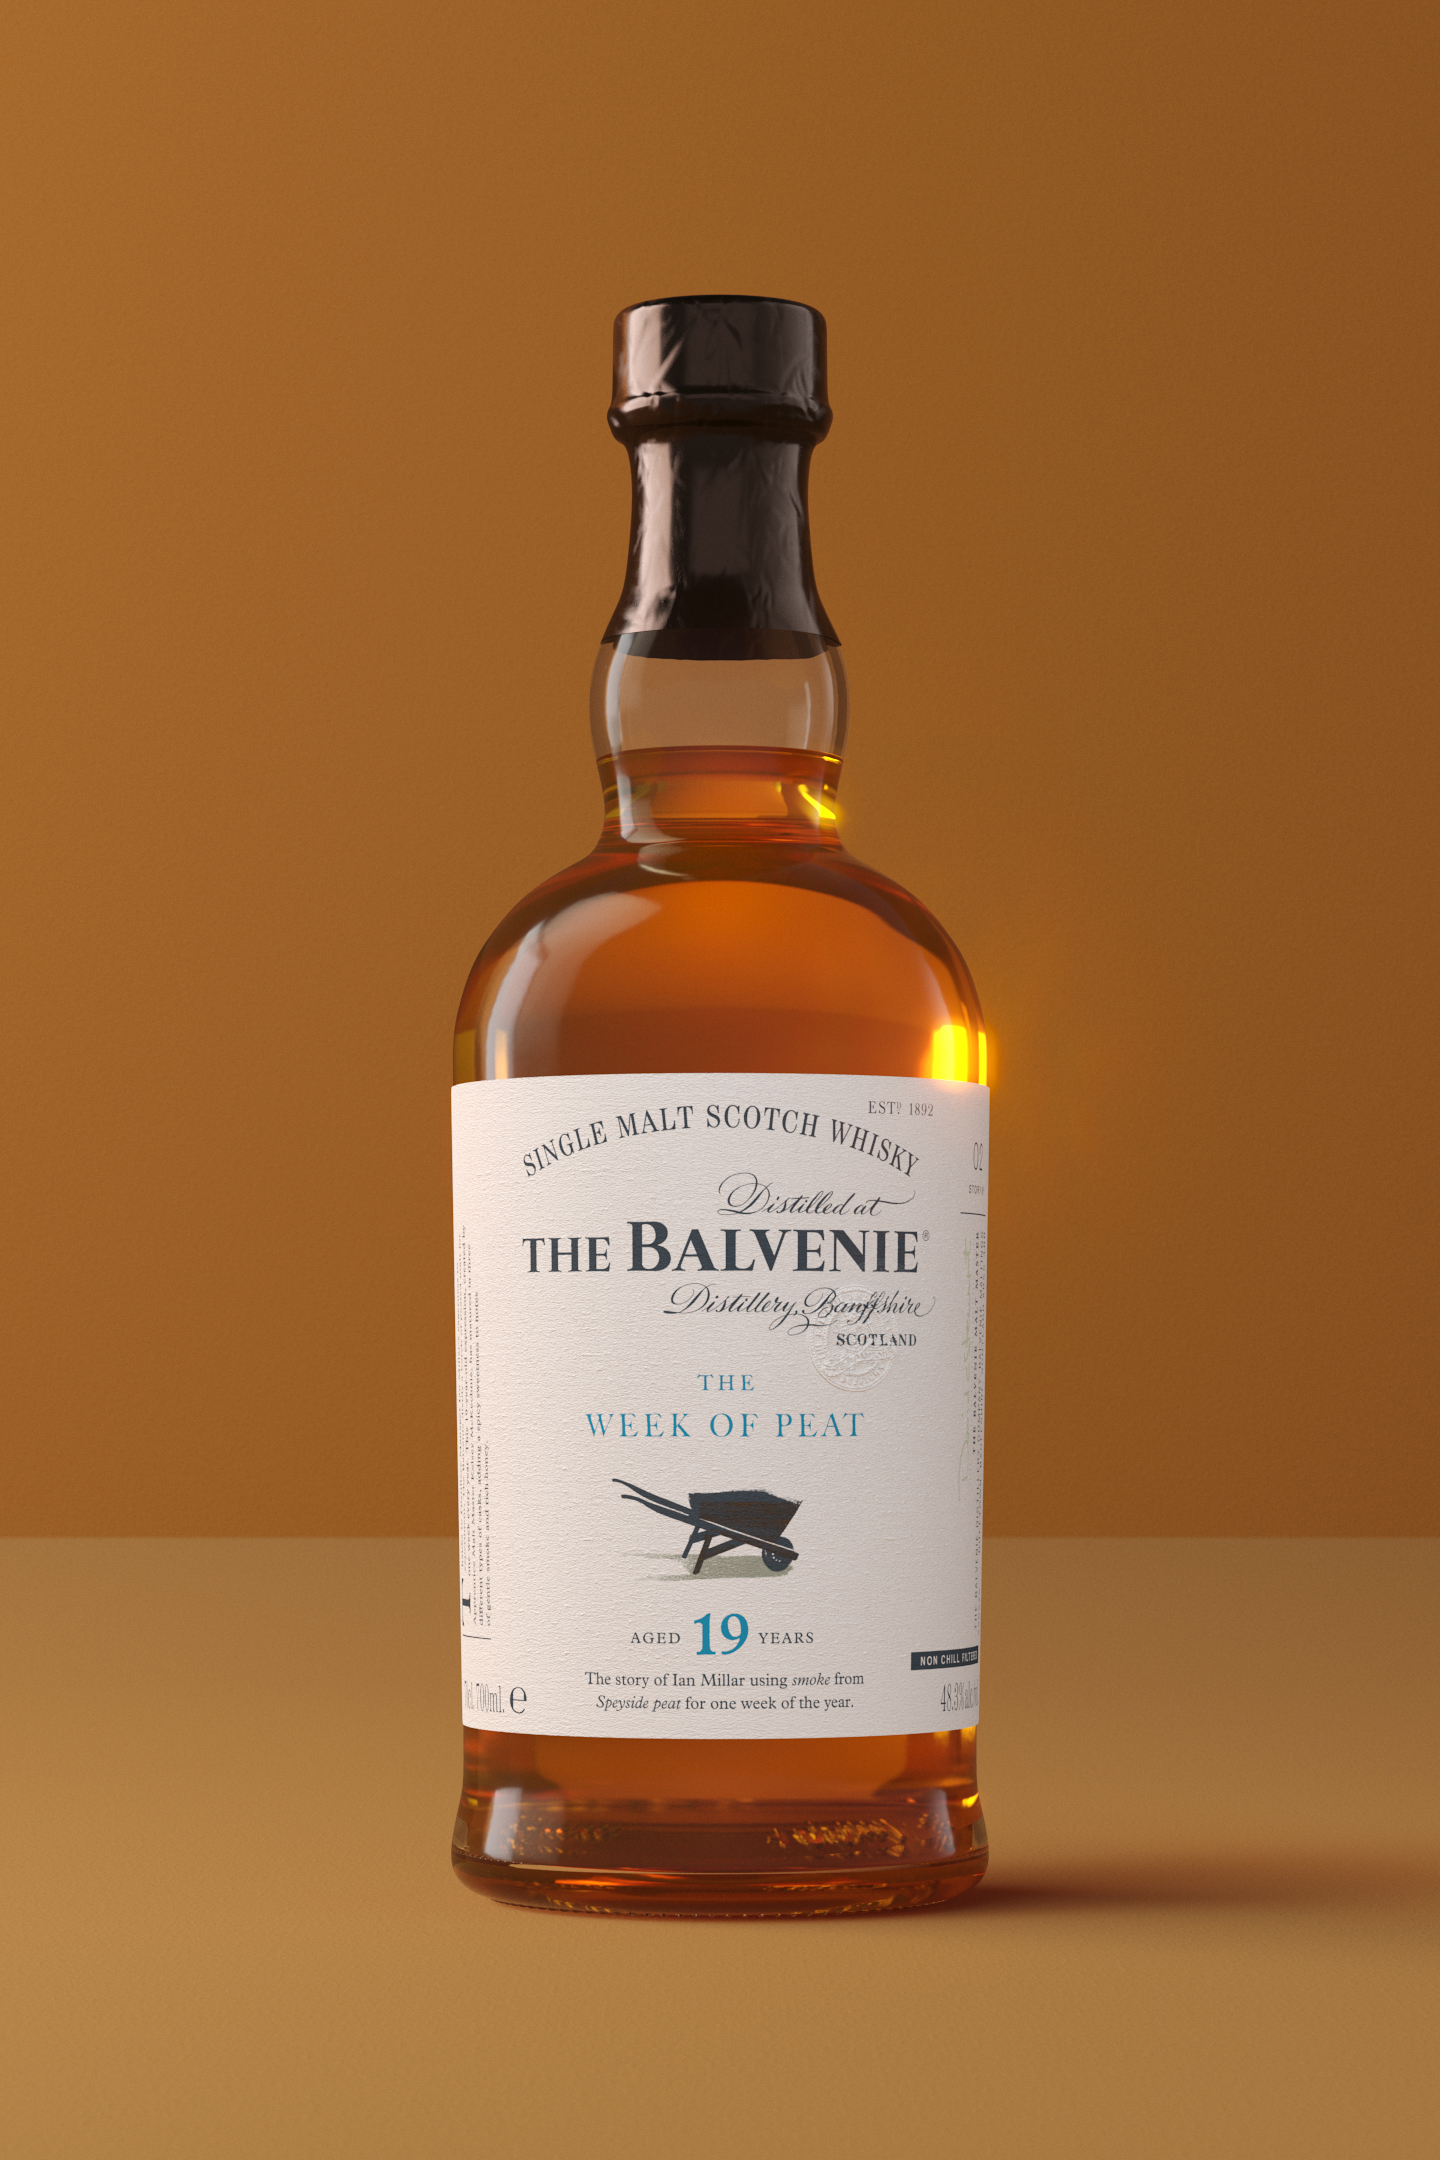 The Creation of a Classic - Cask Finish Whisky - The Balvenie